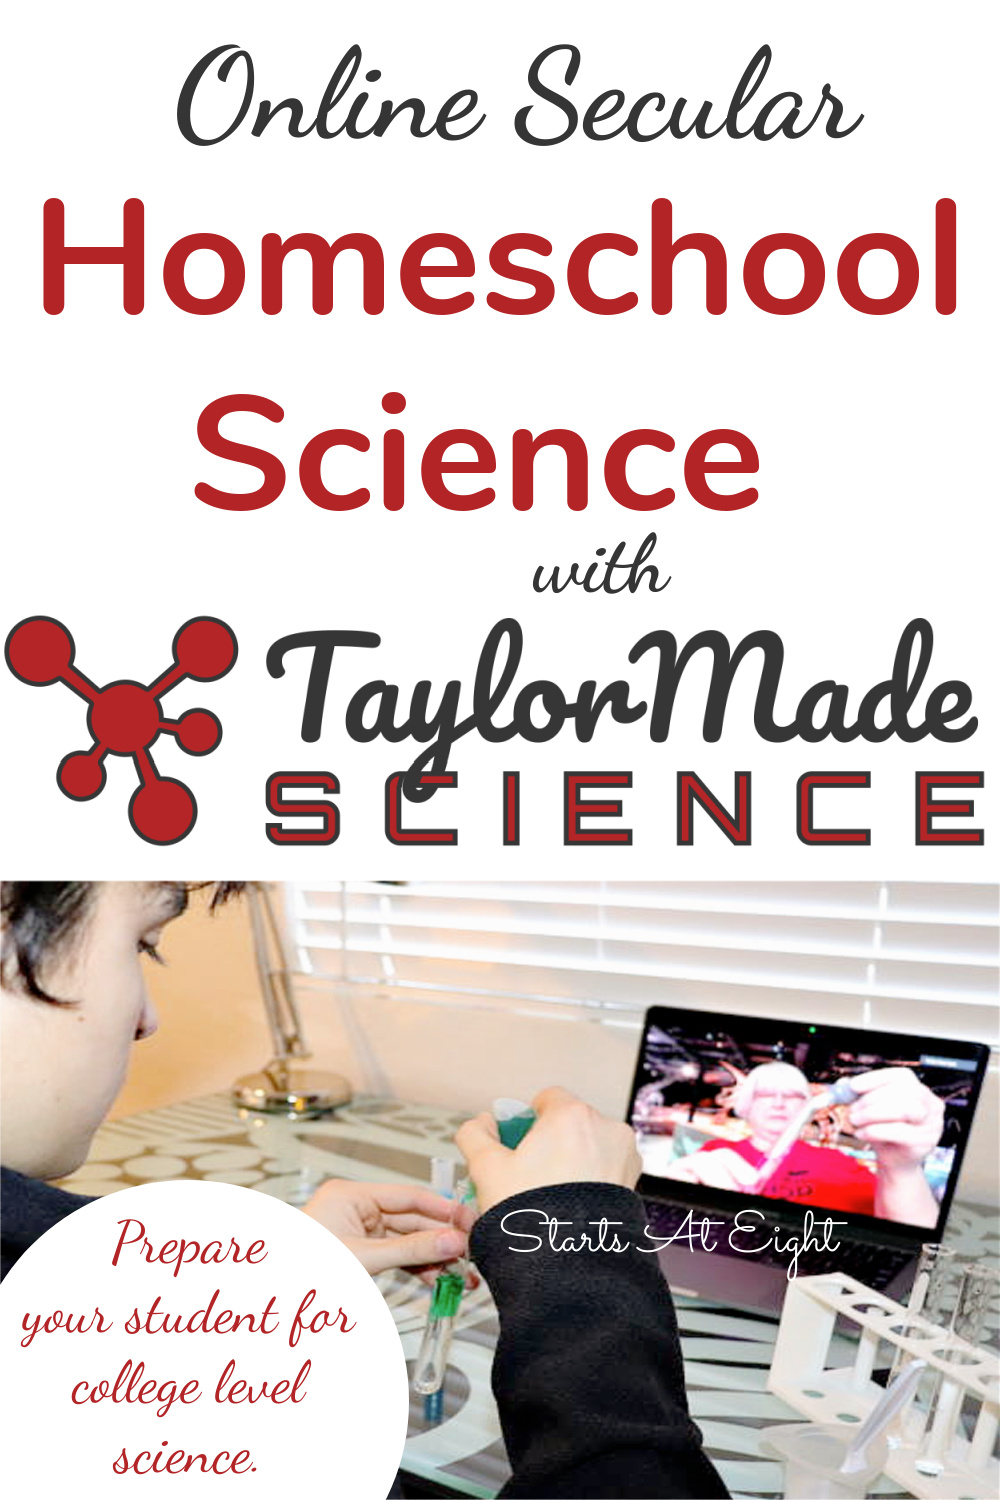 Taylor Made Science offers secular, lab-based science courses that promote science literacy and critical thinking skills. Prepare your student for college and for life!